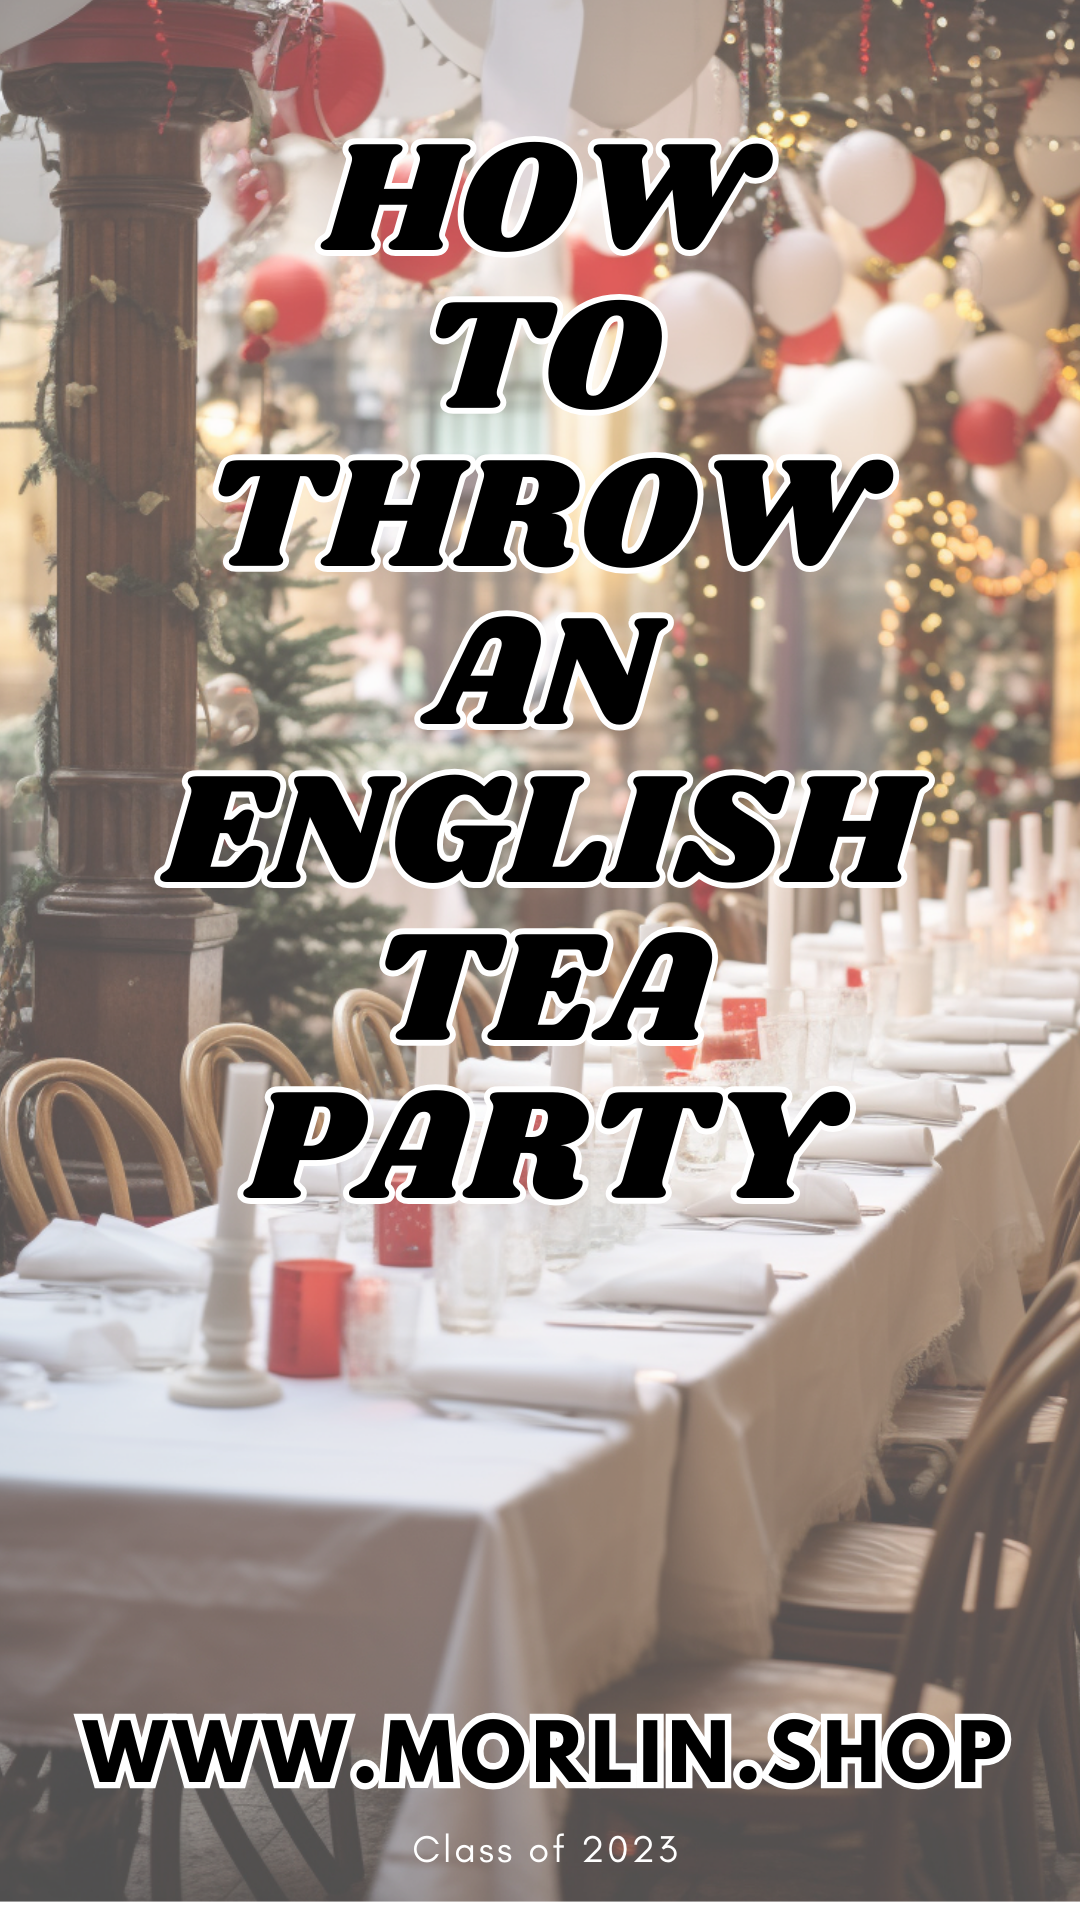 How To Throw An English Tea Party